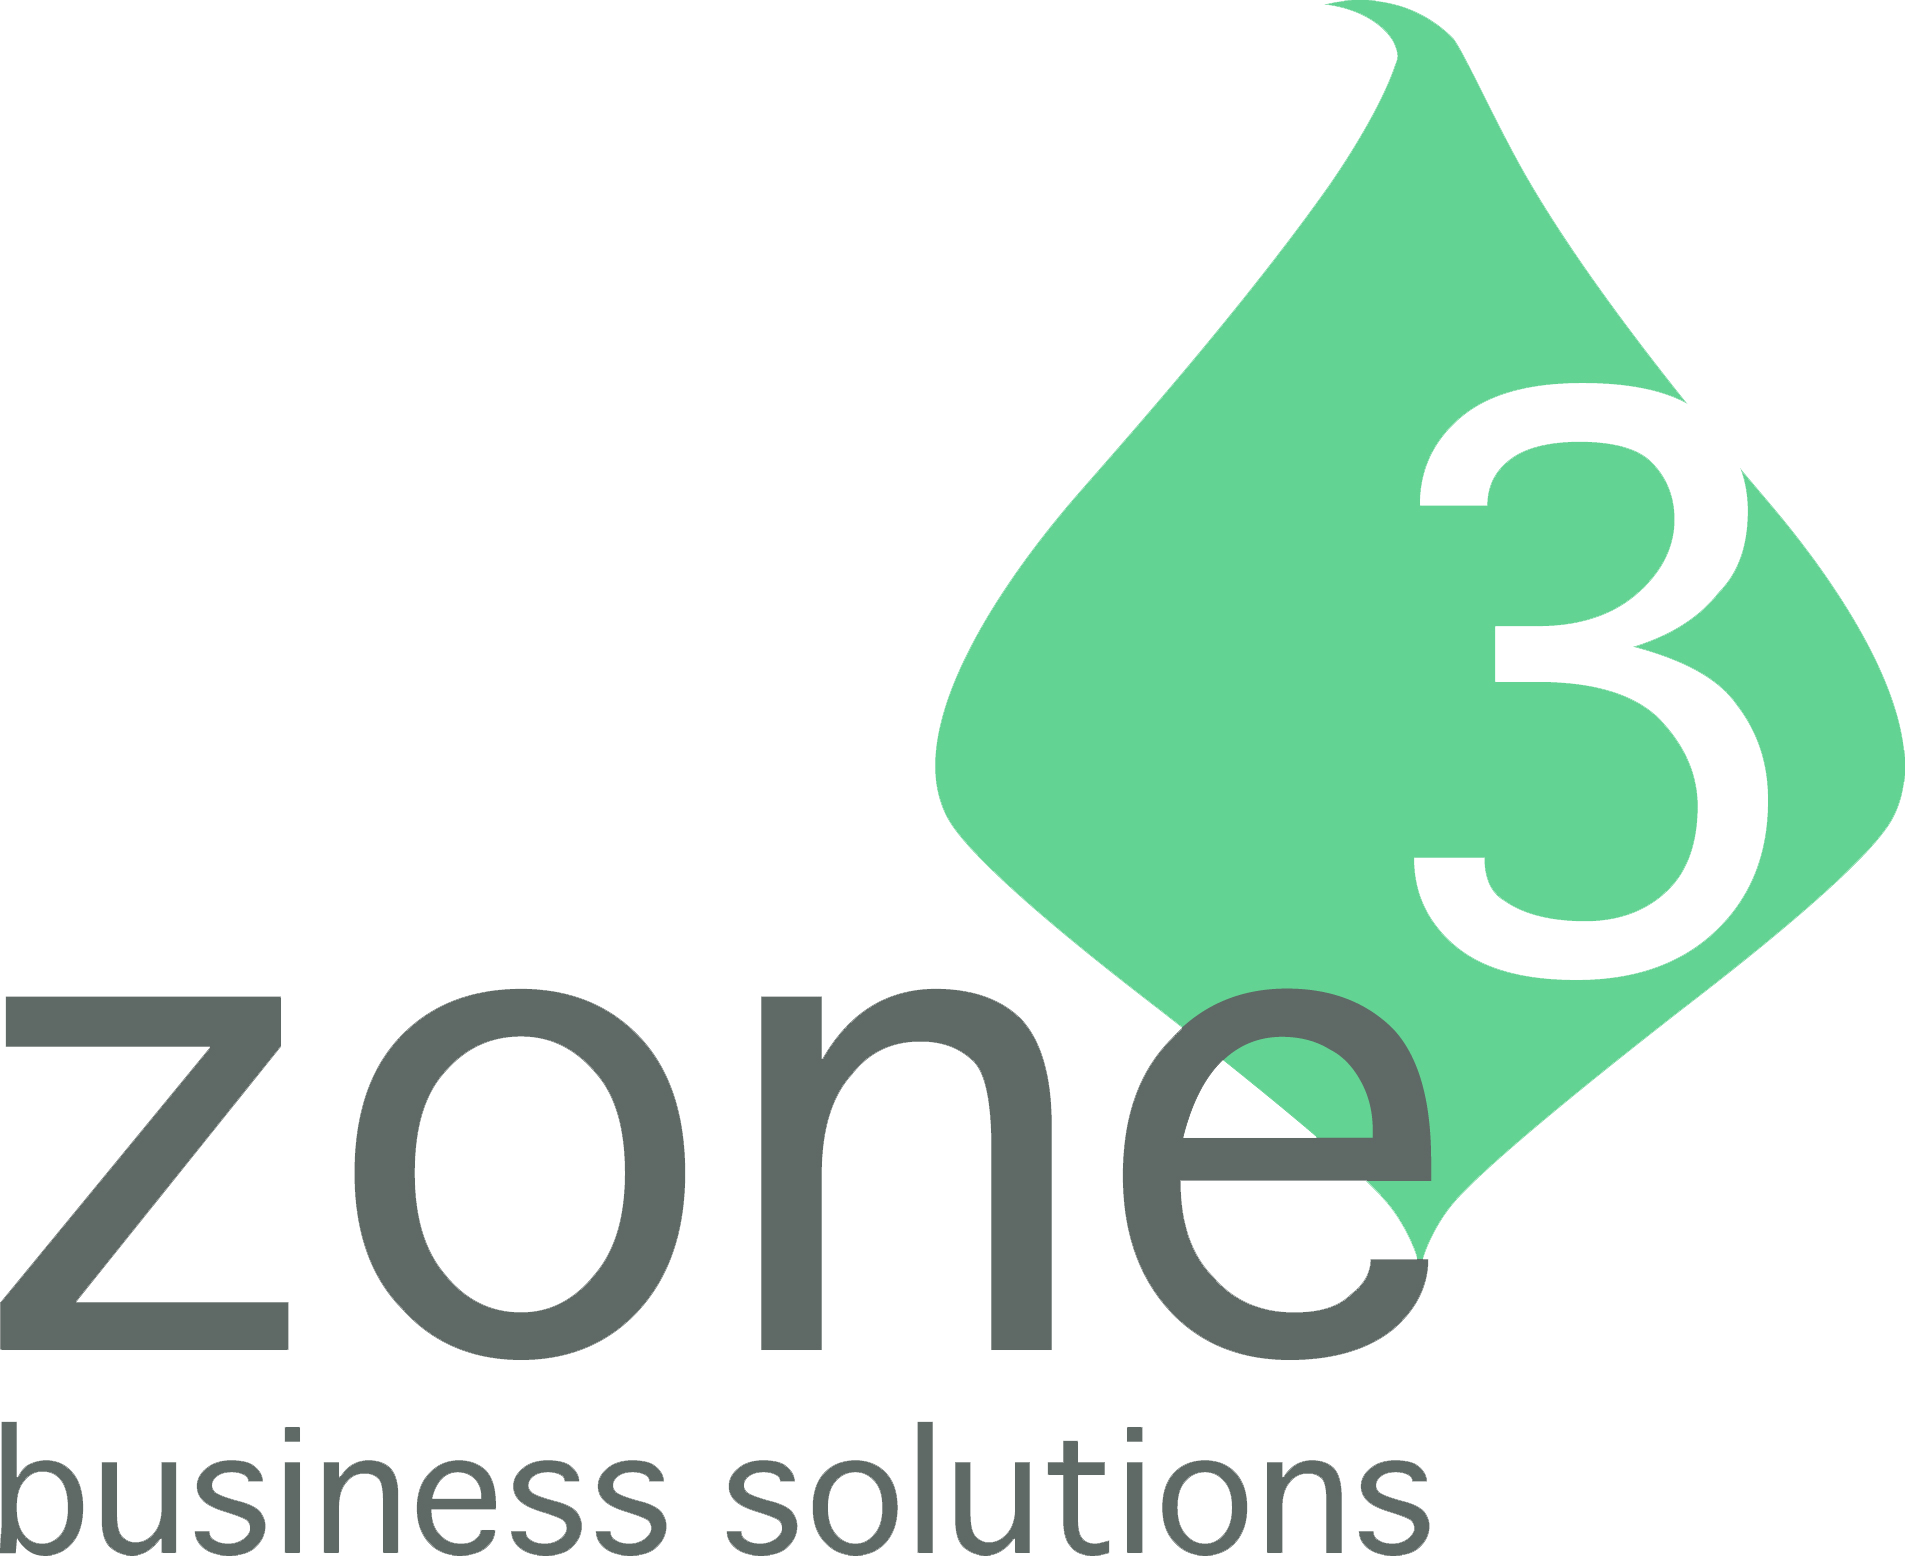 Zone 3 Business Solutions - Zone 3 (1905x1556)